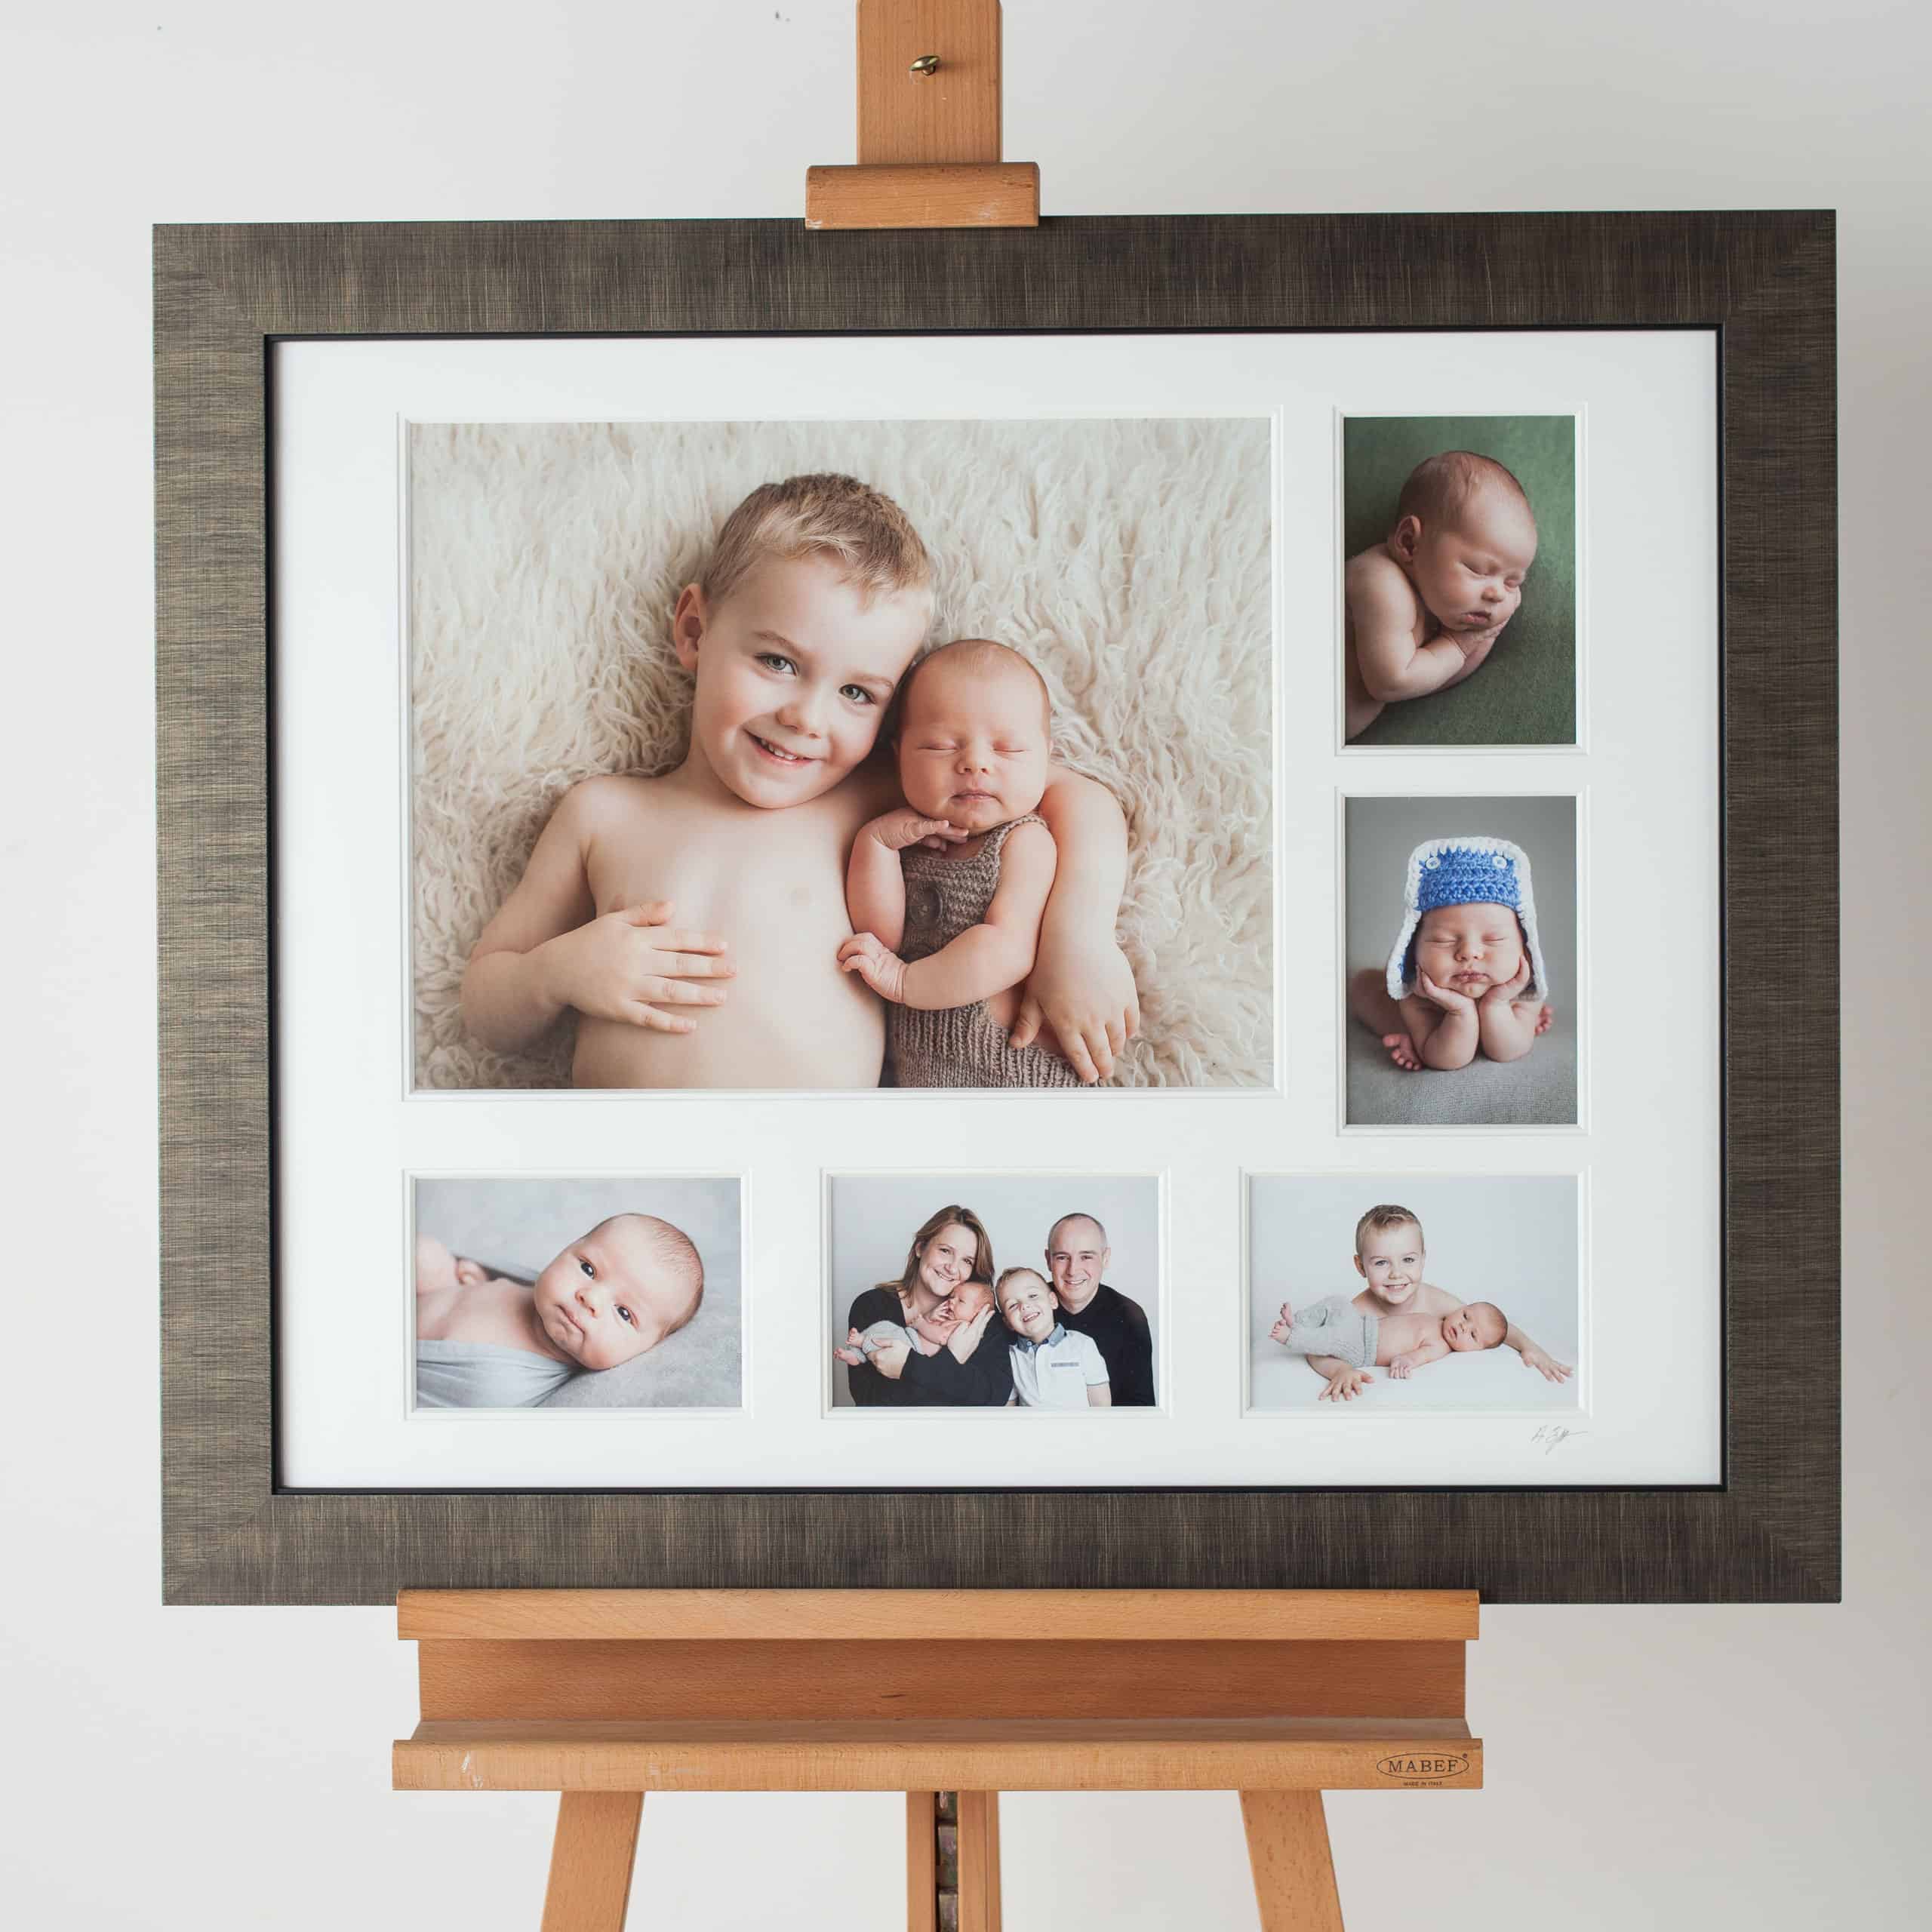 newborn photos planned in the frame. 